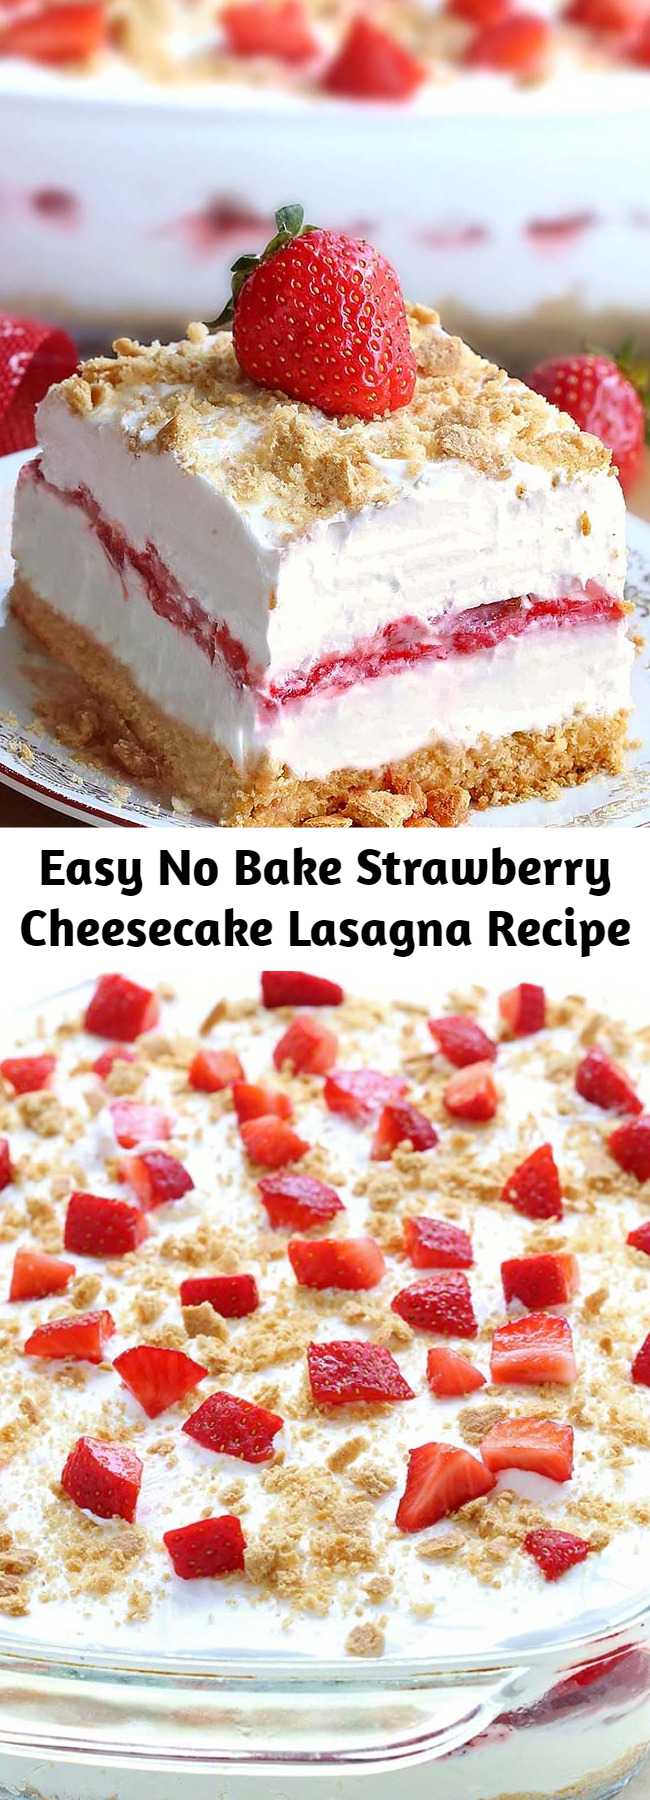 Easy No Bake Strawberry Cheesecake Lasagna Recipe - This No Bake Strawberry Cheesecake Lasagna will make all Your Strawberries and Cream dreams come true. A dessert lasagna with graham cracker crust, cream cheese filling, strawberries and cream topping.